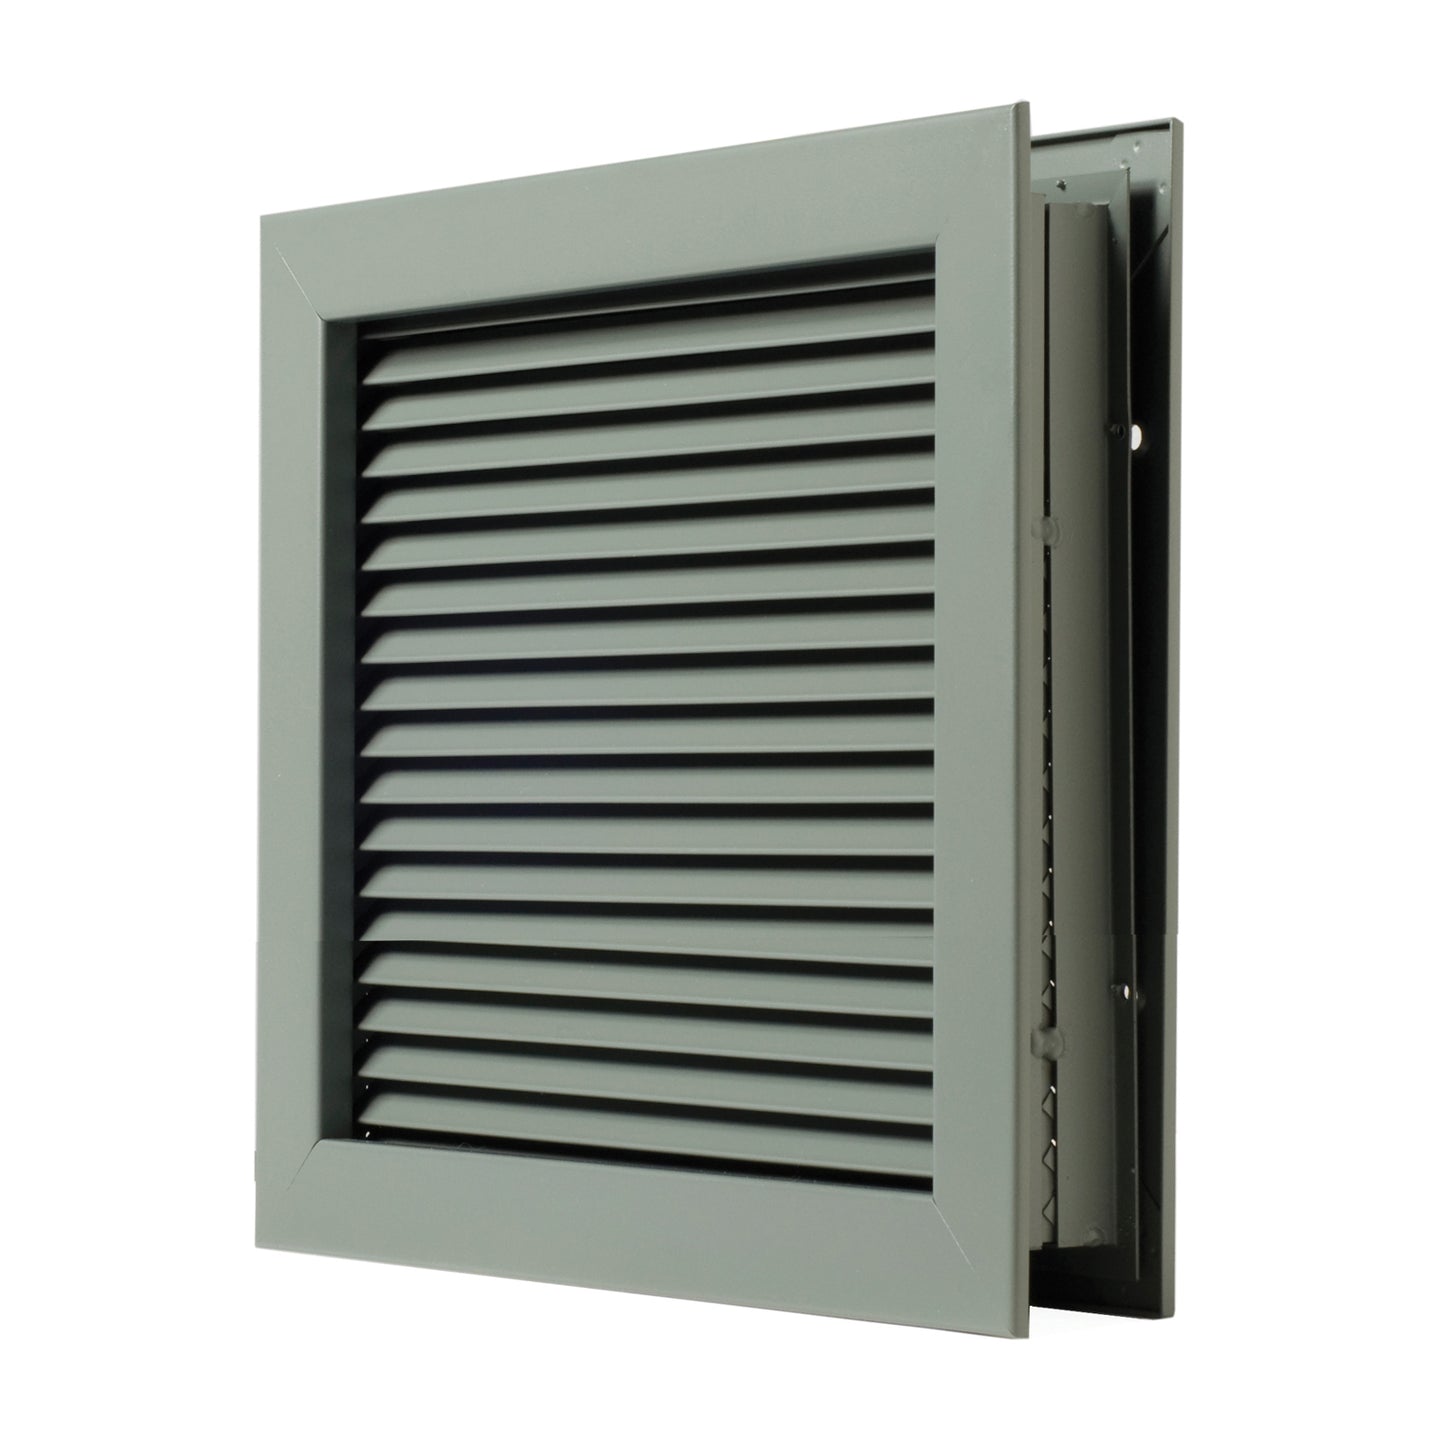 18" x 18" Self Attaching No Vision Door Louver for 1-3/4" Doors Prime Coat Finish